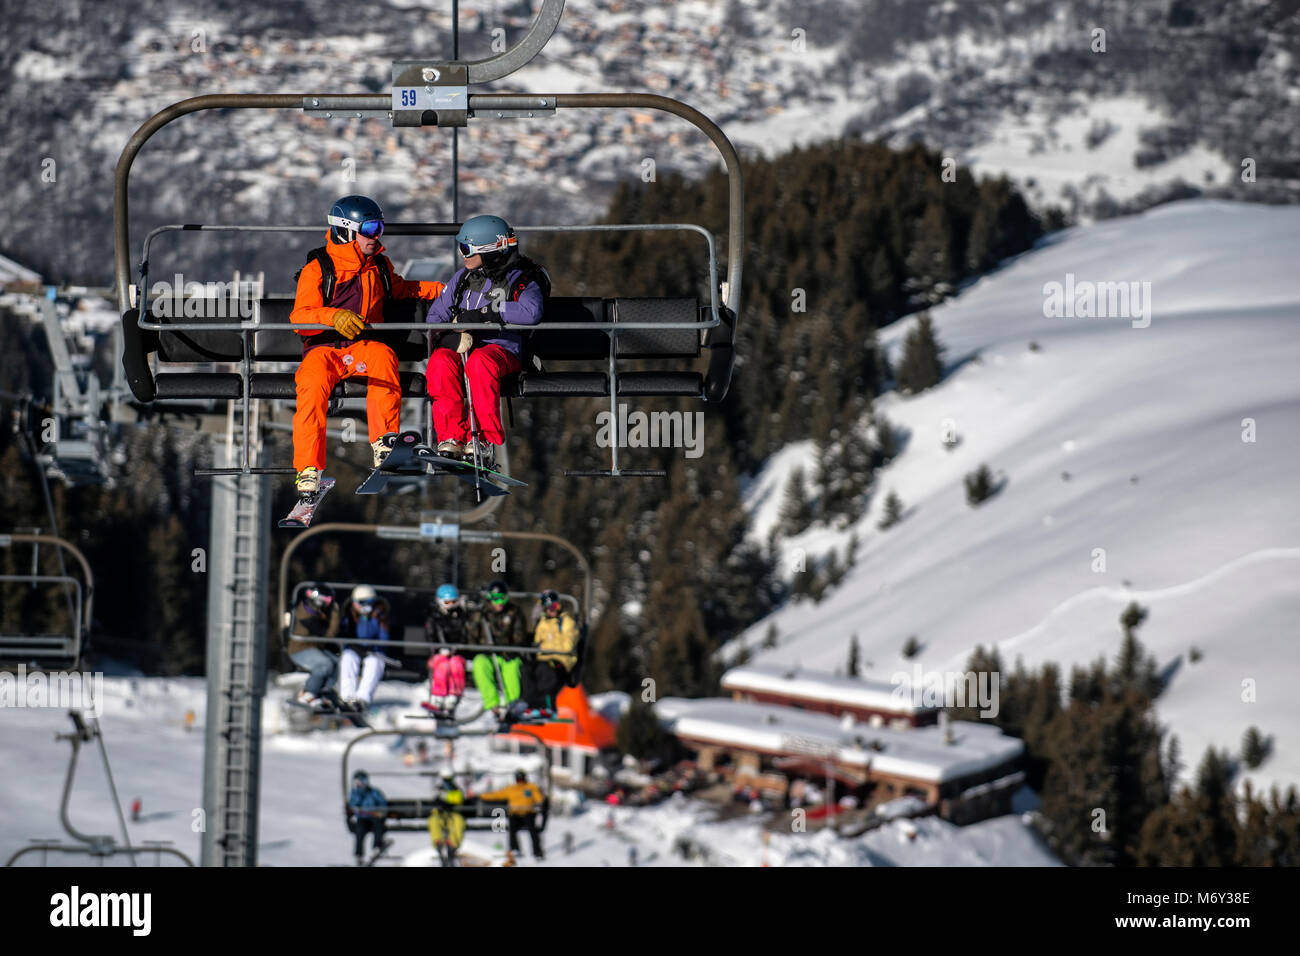 A male ski instructor speaks to a woman on a chairlift in the French Alpine resort of Courchevel. Stock Photo